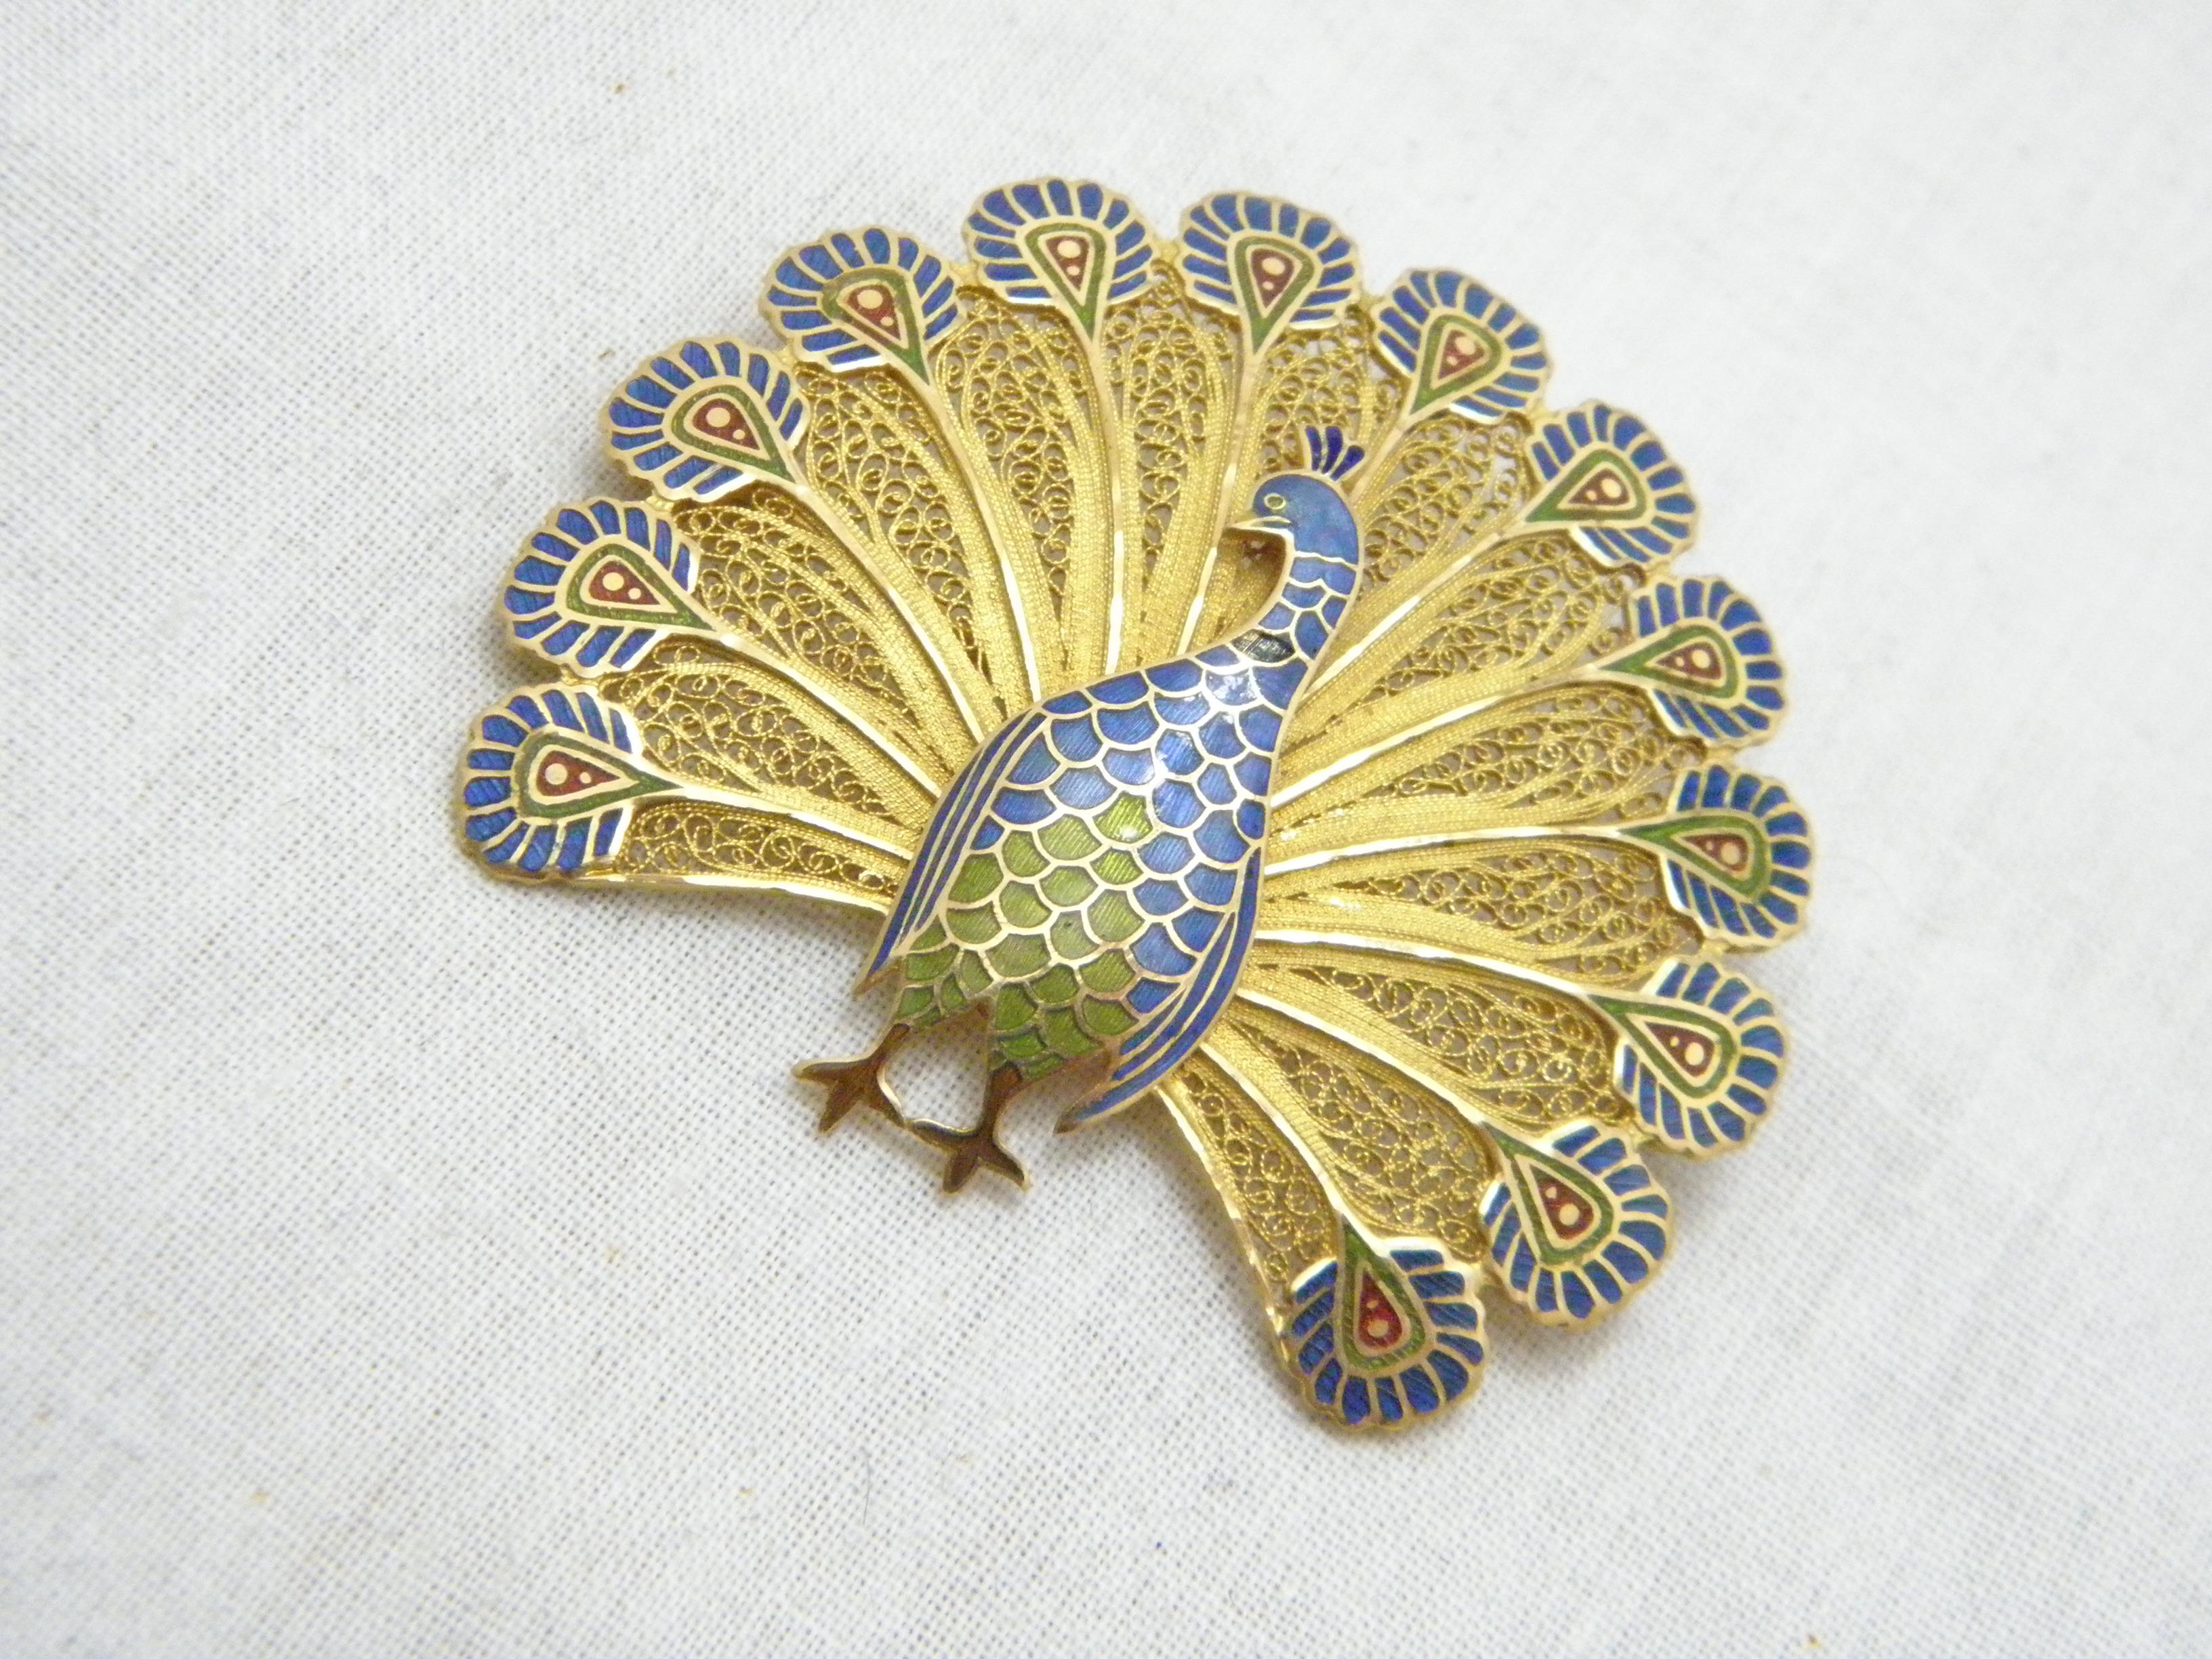 If you have landed on this page then you have an eye for beauty.

On offer is this gorgeous

14CT HEAVY SOLID GOLD PORTUGESE ENAMEL PEACOCK BROOCH

DETAILS
Material: 14ct (585/000) Solid Heavy Yellow Gold
Style: Bespoke designer highly detailed